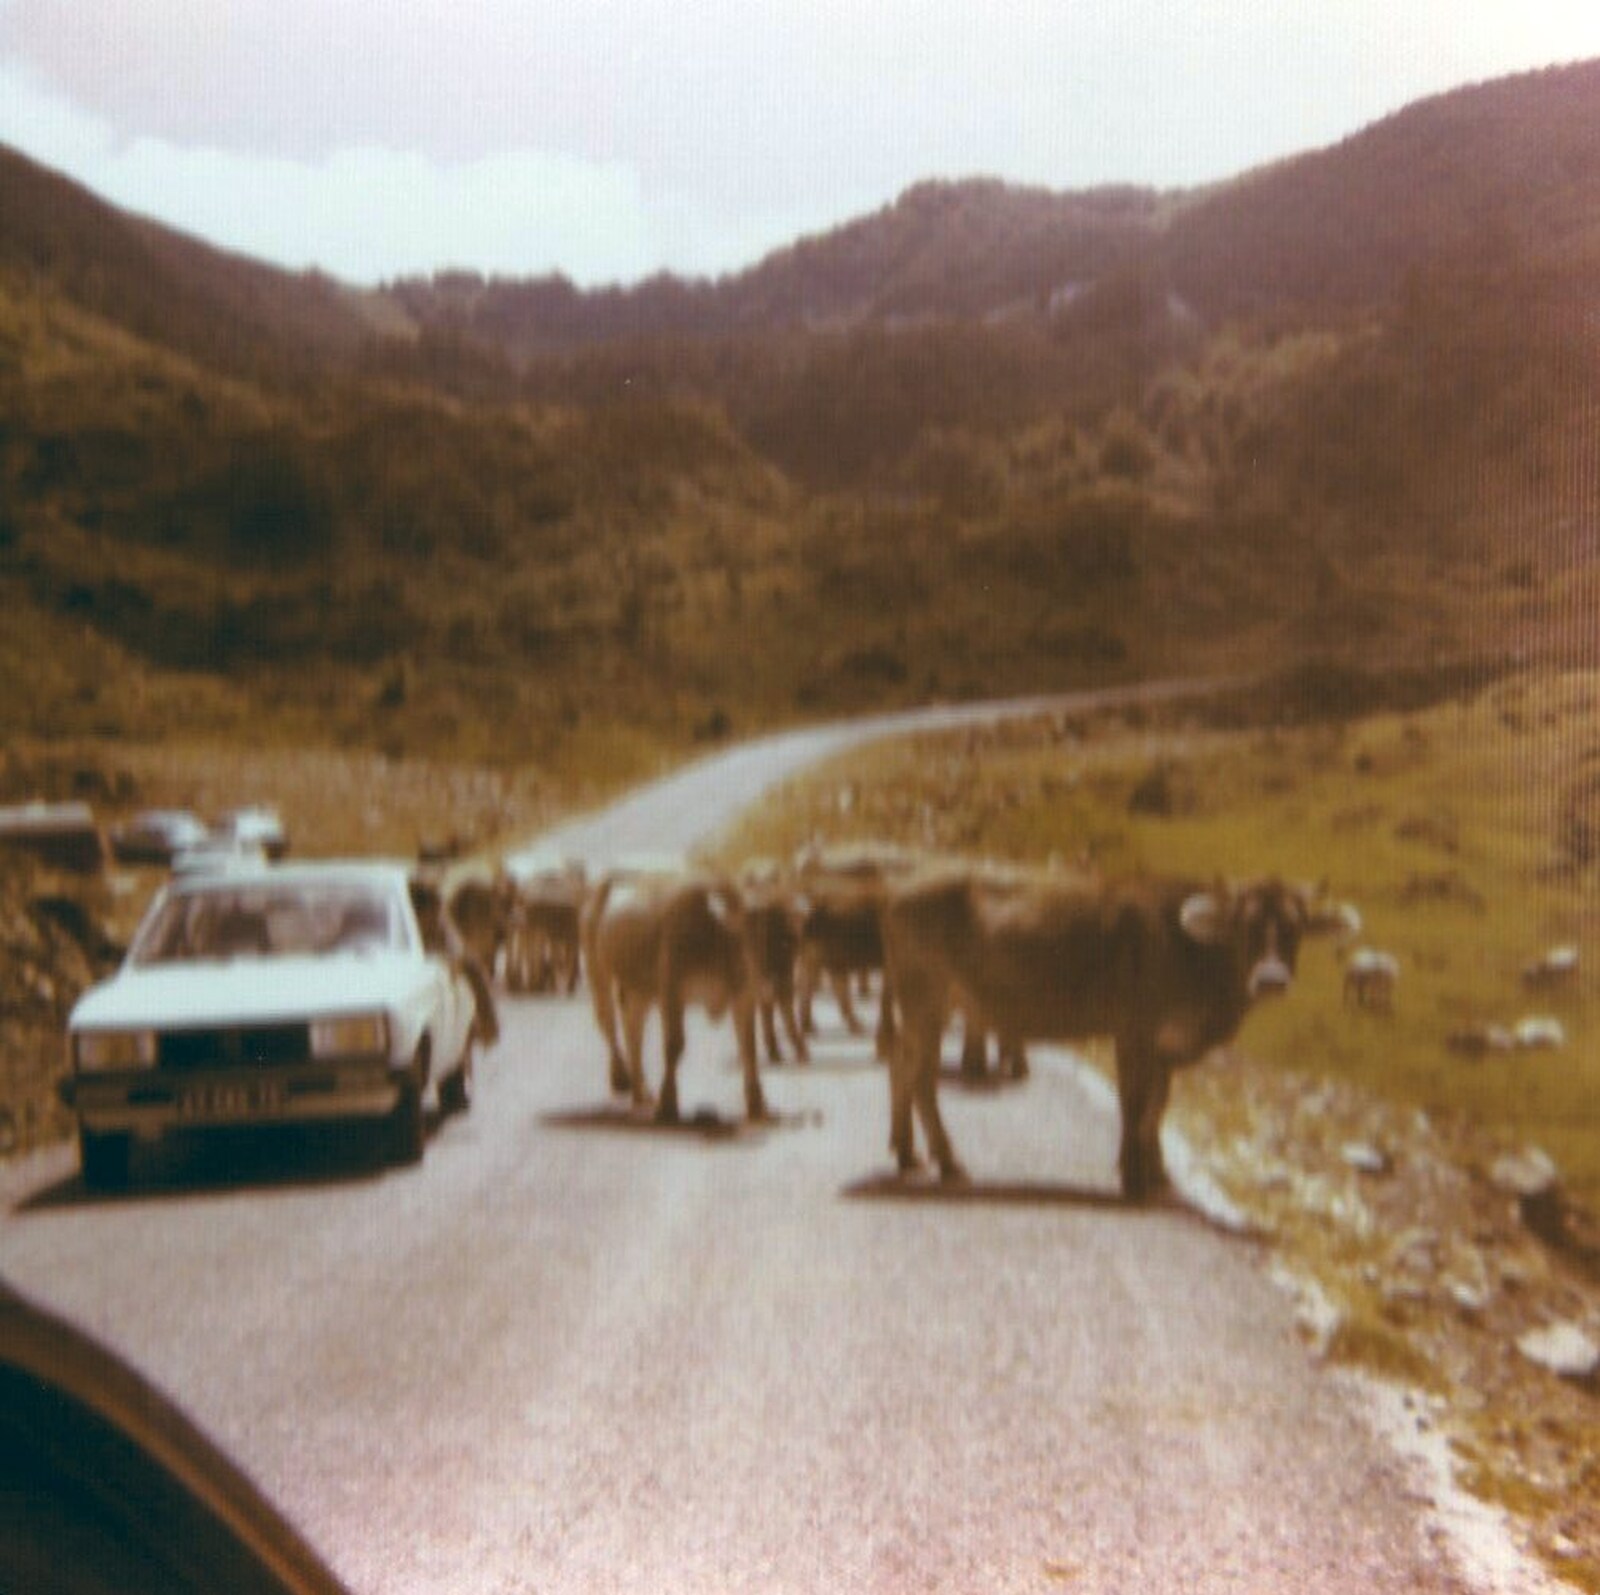 On a trip up in the Pyrenees, we're stopped by cows from A Trip to Bram, Aude, France - 25th July 1980